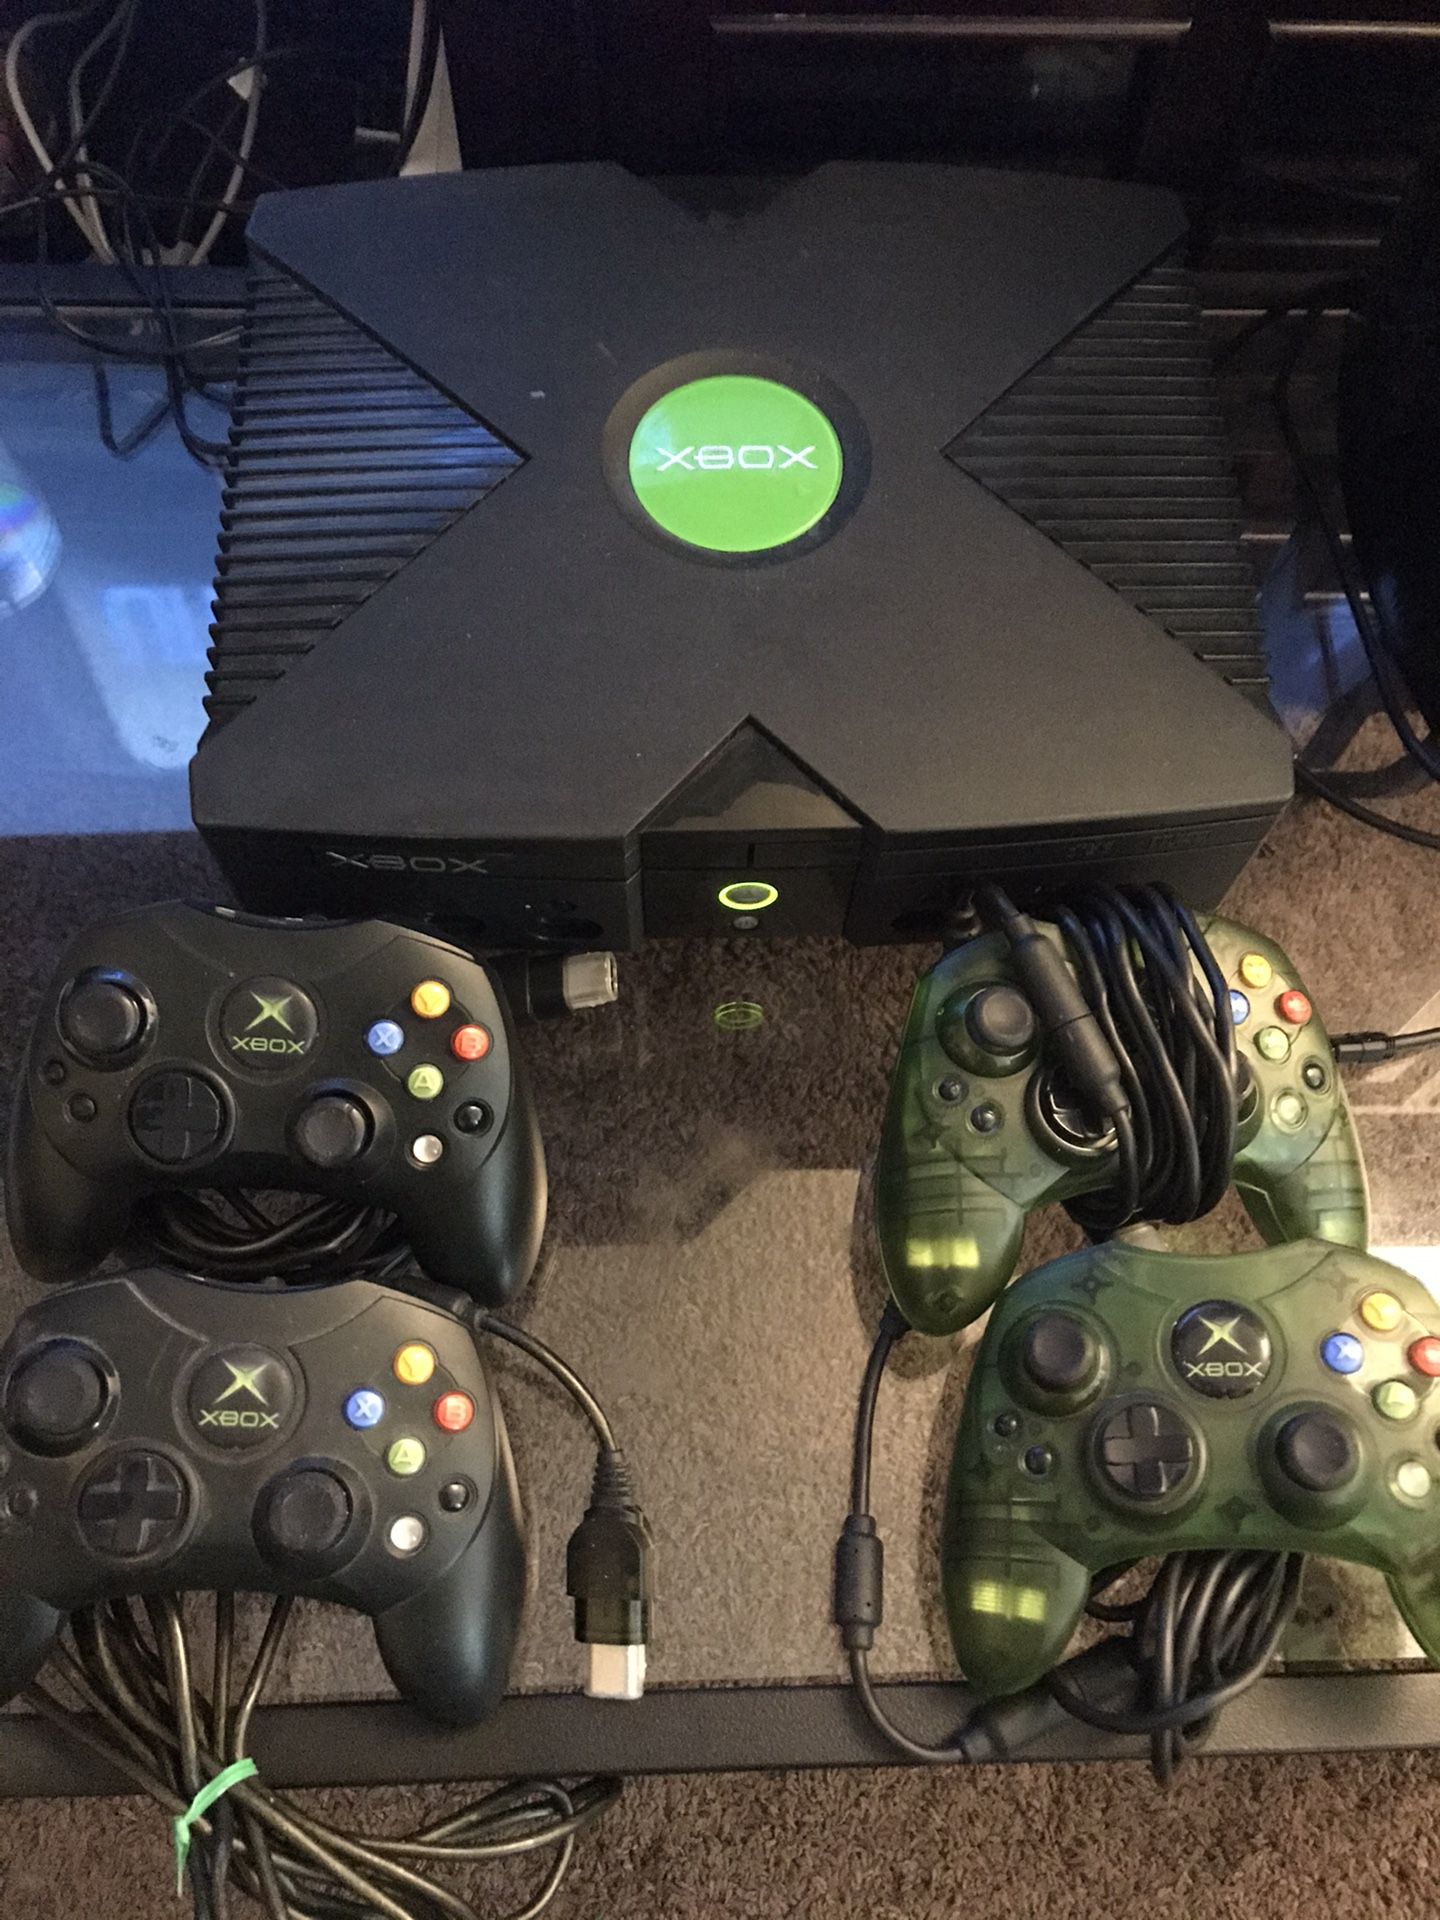 Softmodded Original Xbox 2TB w/ 1000’s of Games